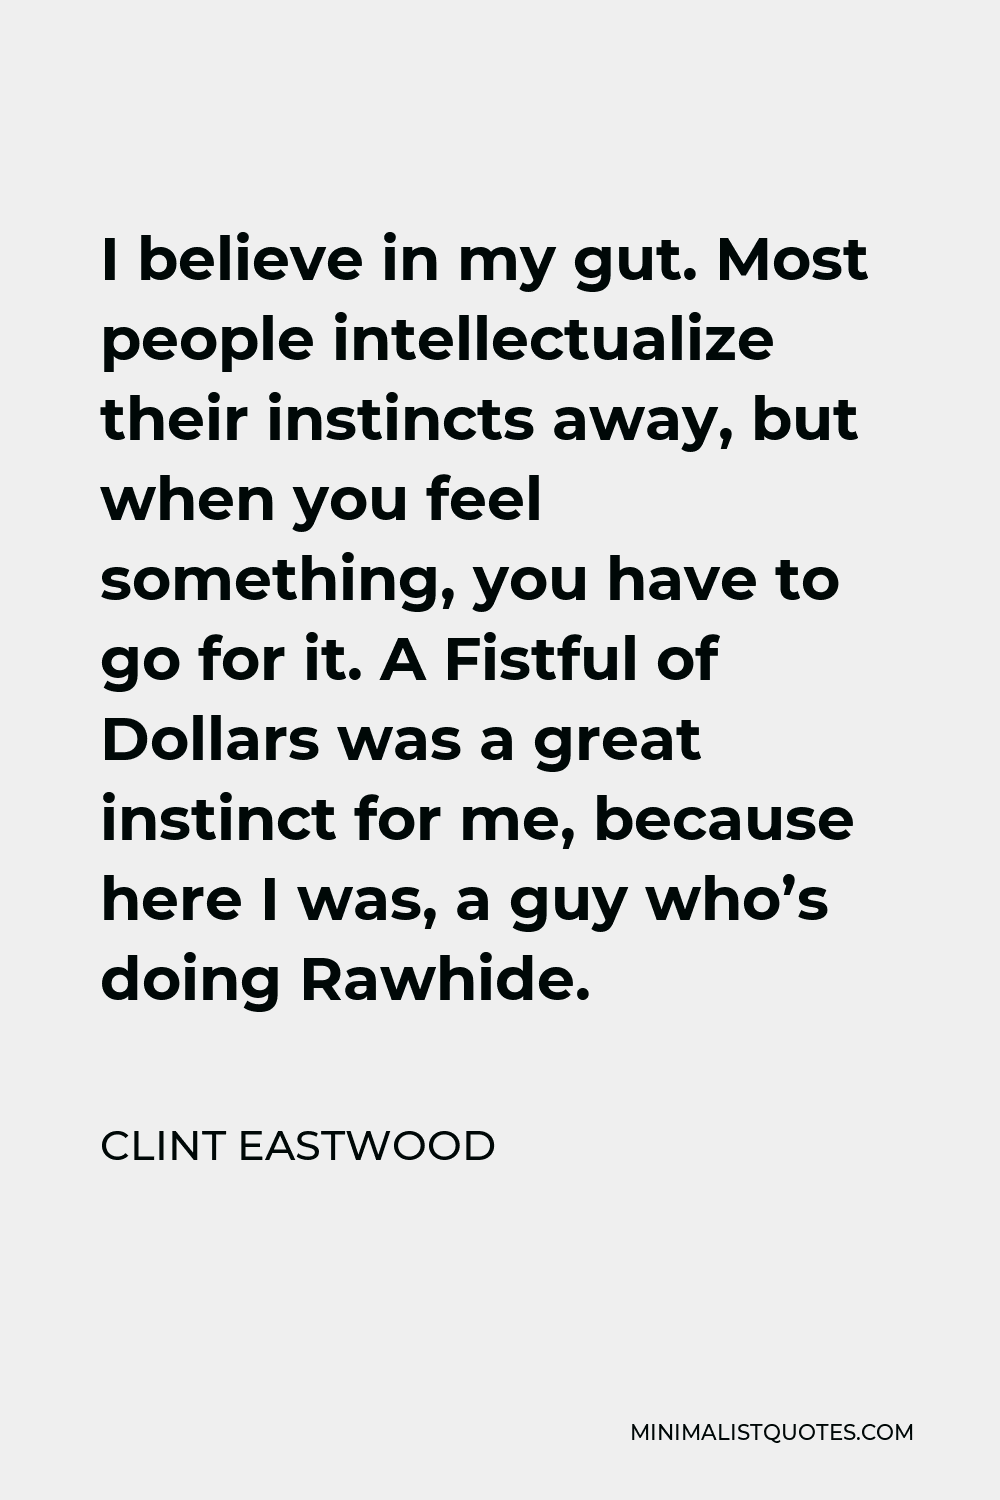 Clint Eastwood Quote - I believe in my gut. Most people intellectualize their instincts away, but when you feel something, you have to go for it. A Fistful of Dollars was a great instinct for me, because here I was, a guy who’s doing Rawhide.